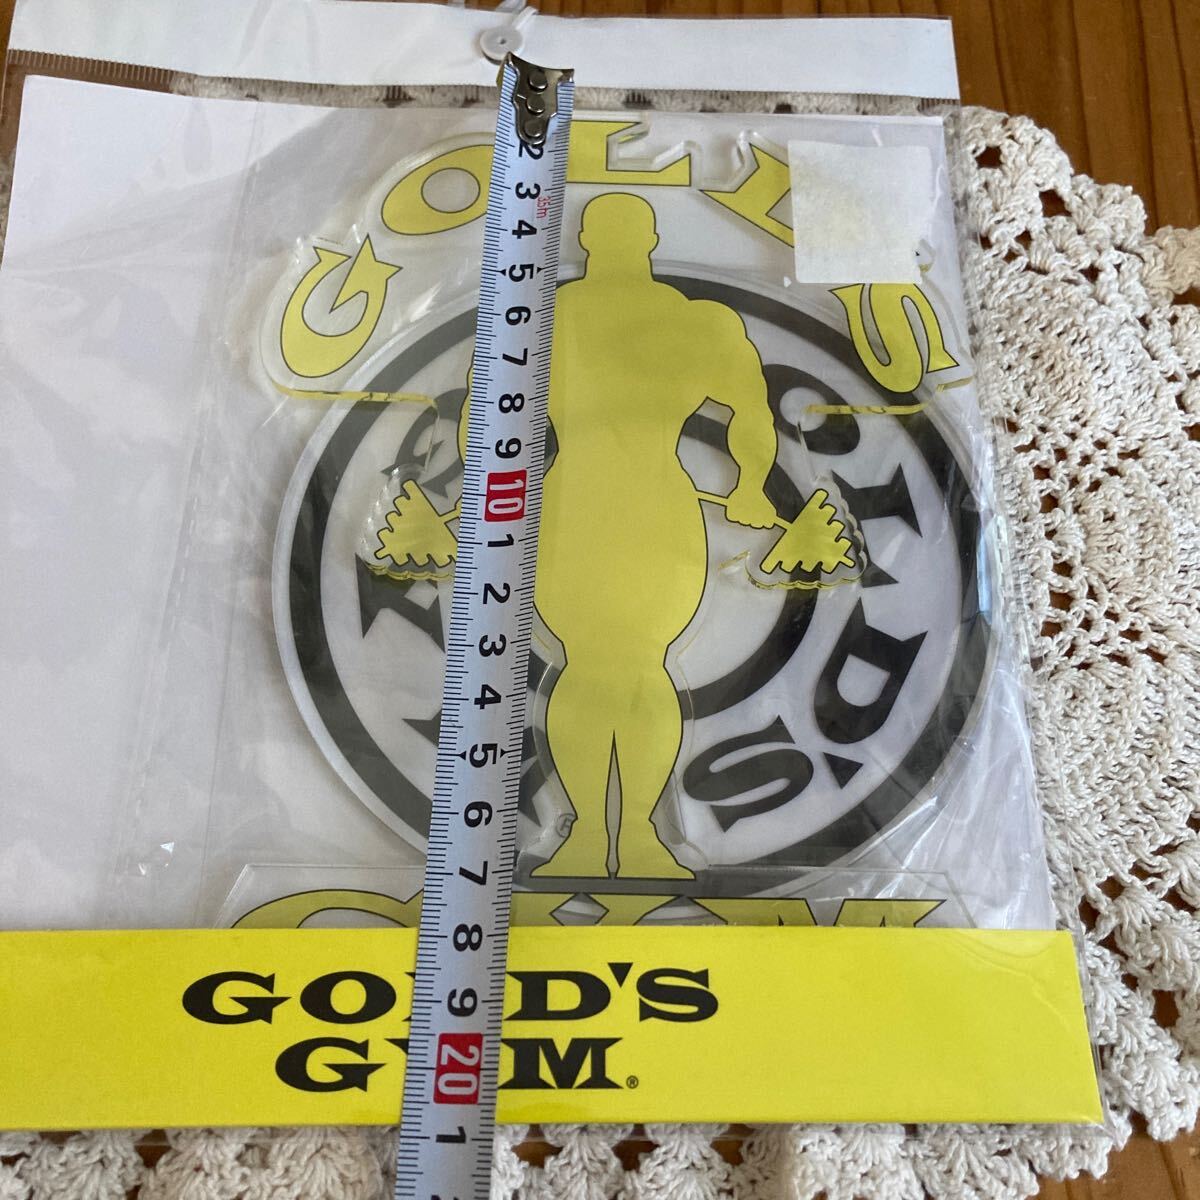  new goods unopened prompt decision free shipping!GOLD\'S GYM Gold Jim acrylic fiber stand yellow 